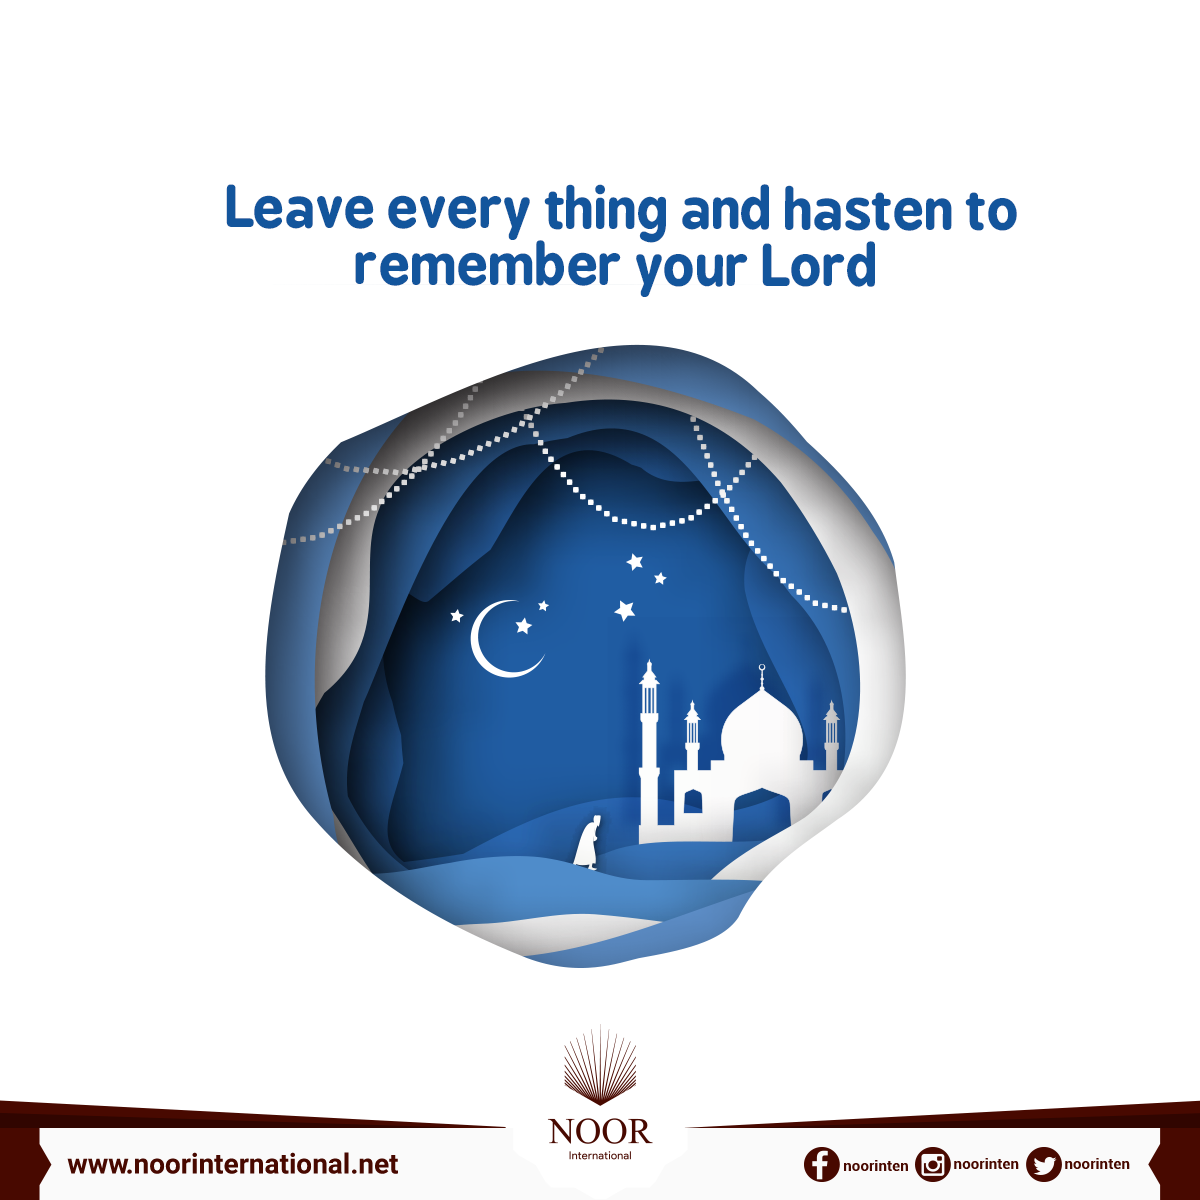 Leave every thing and hasten to remember your Lord